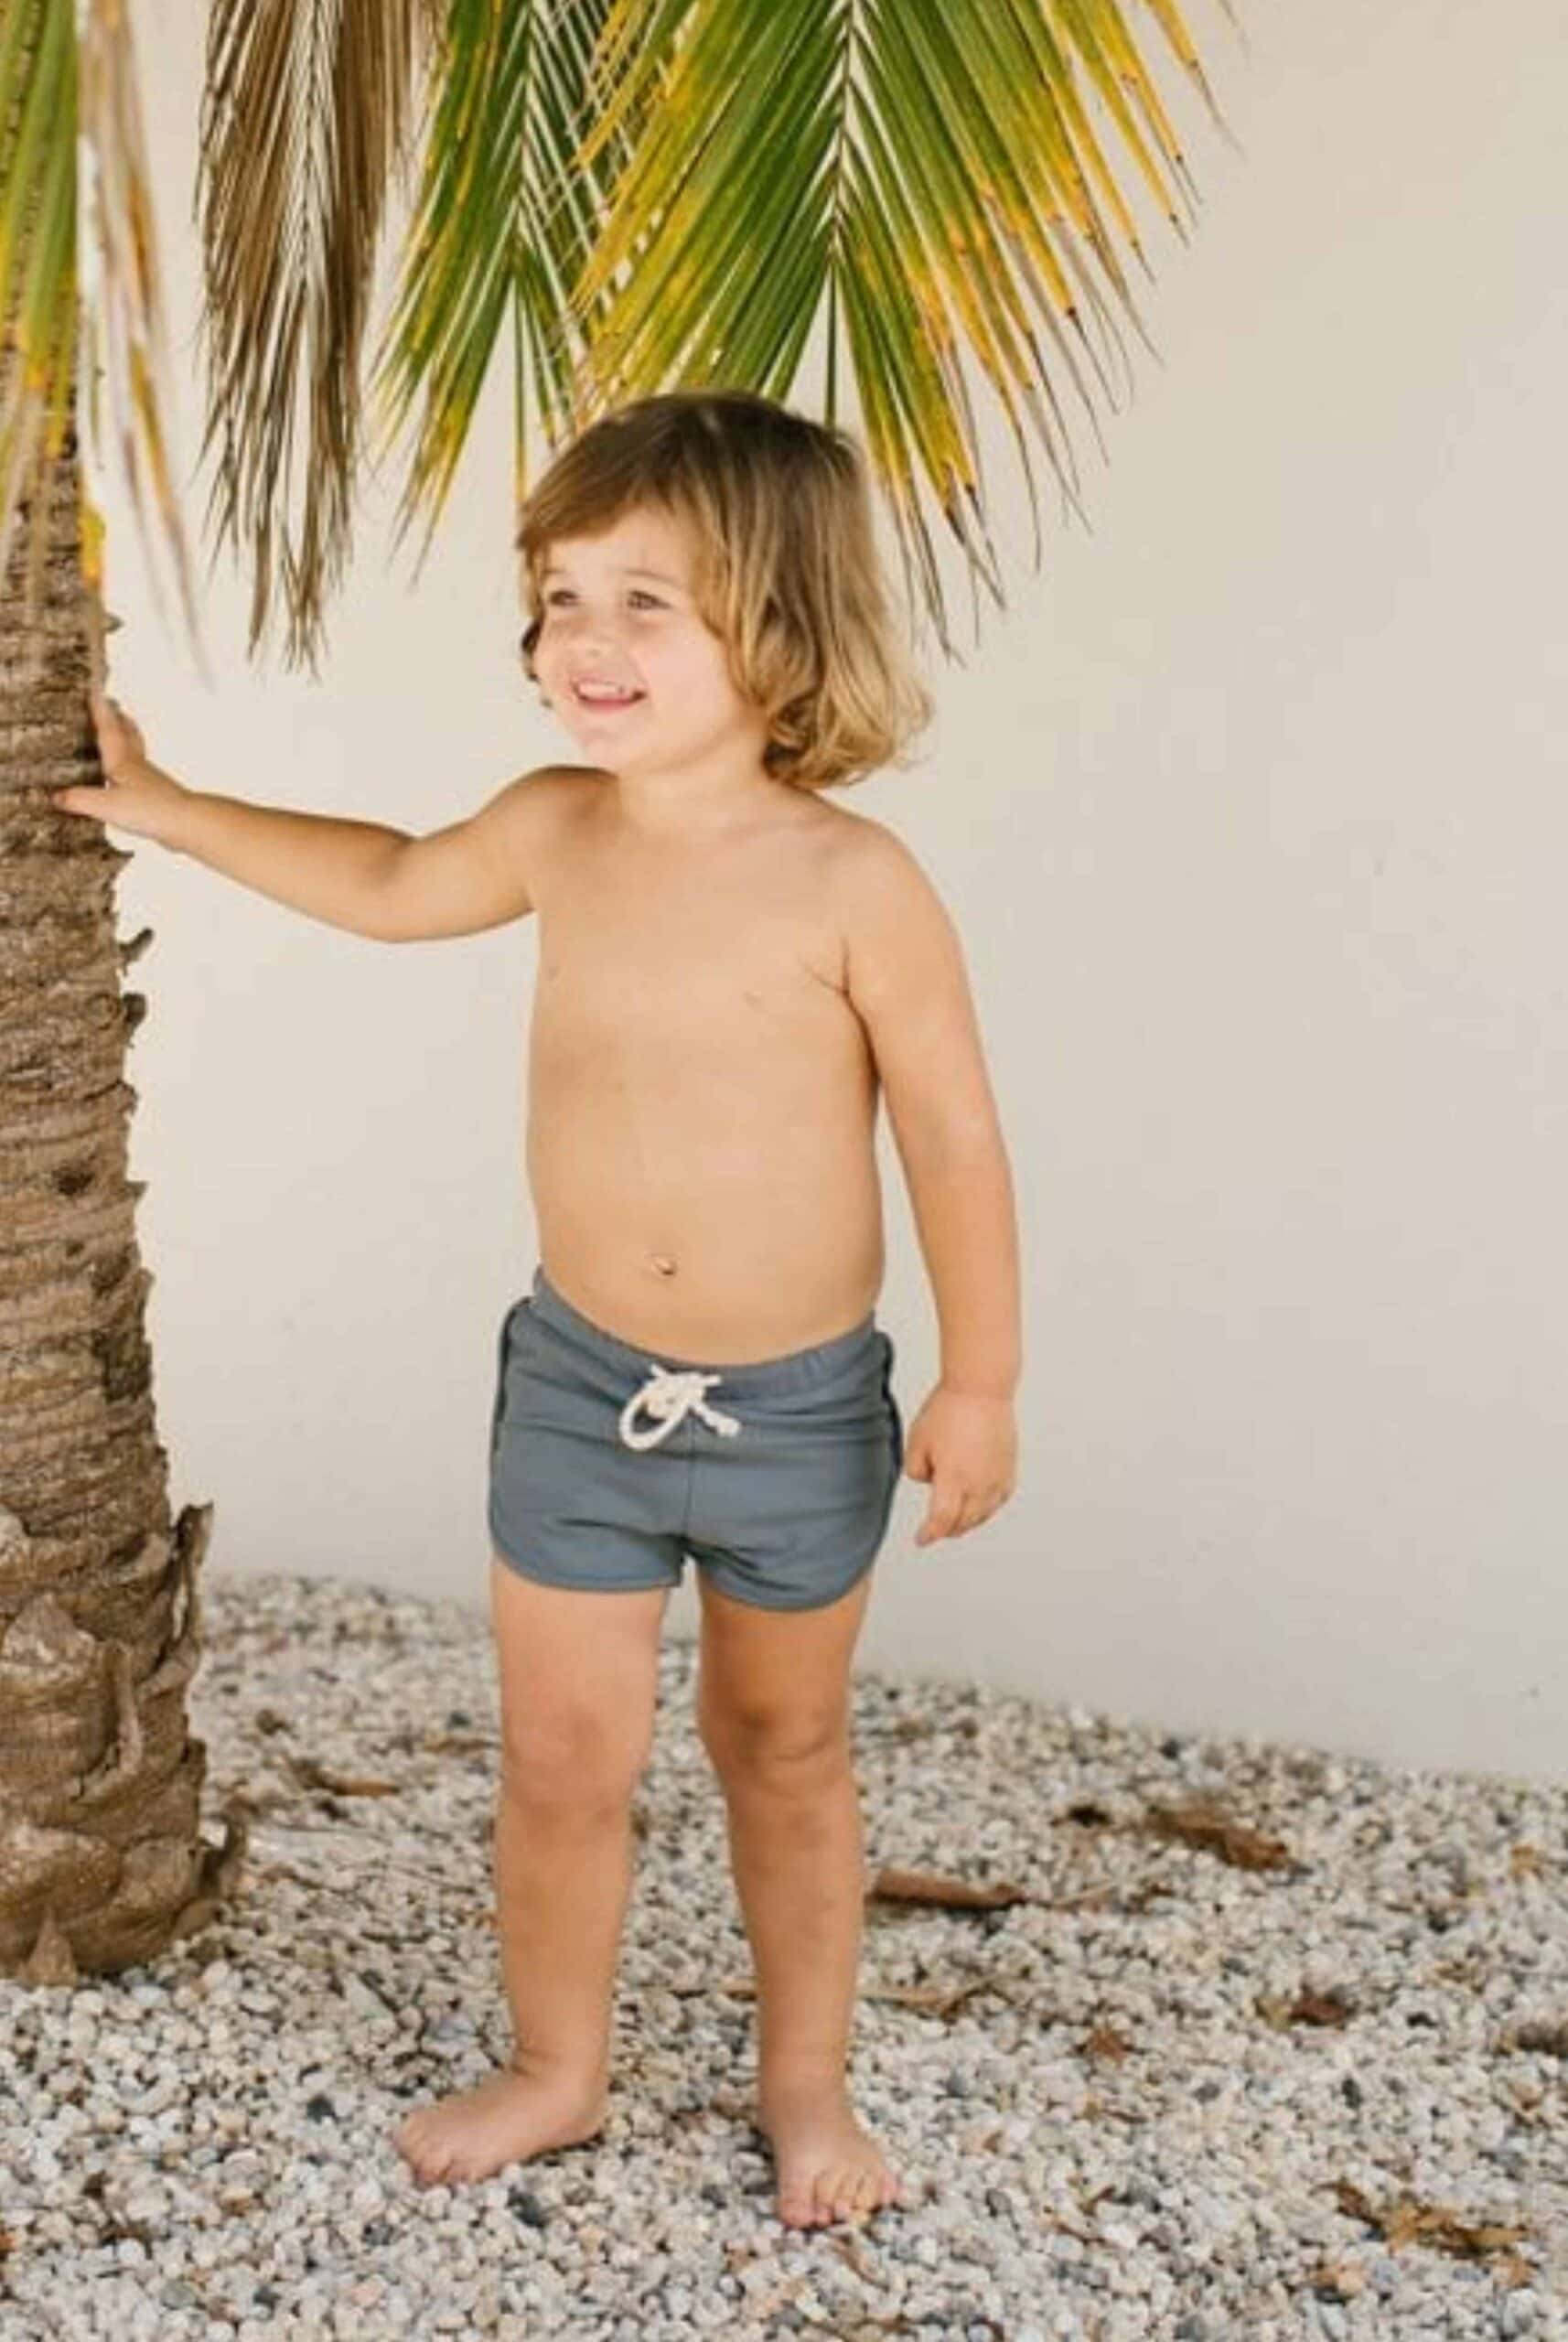 A young boy is standing next to a palm tree.